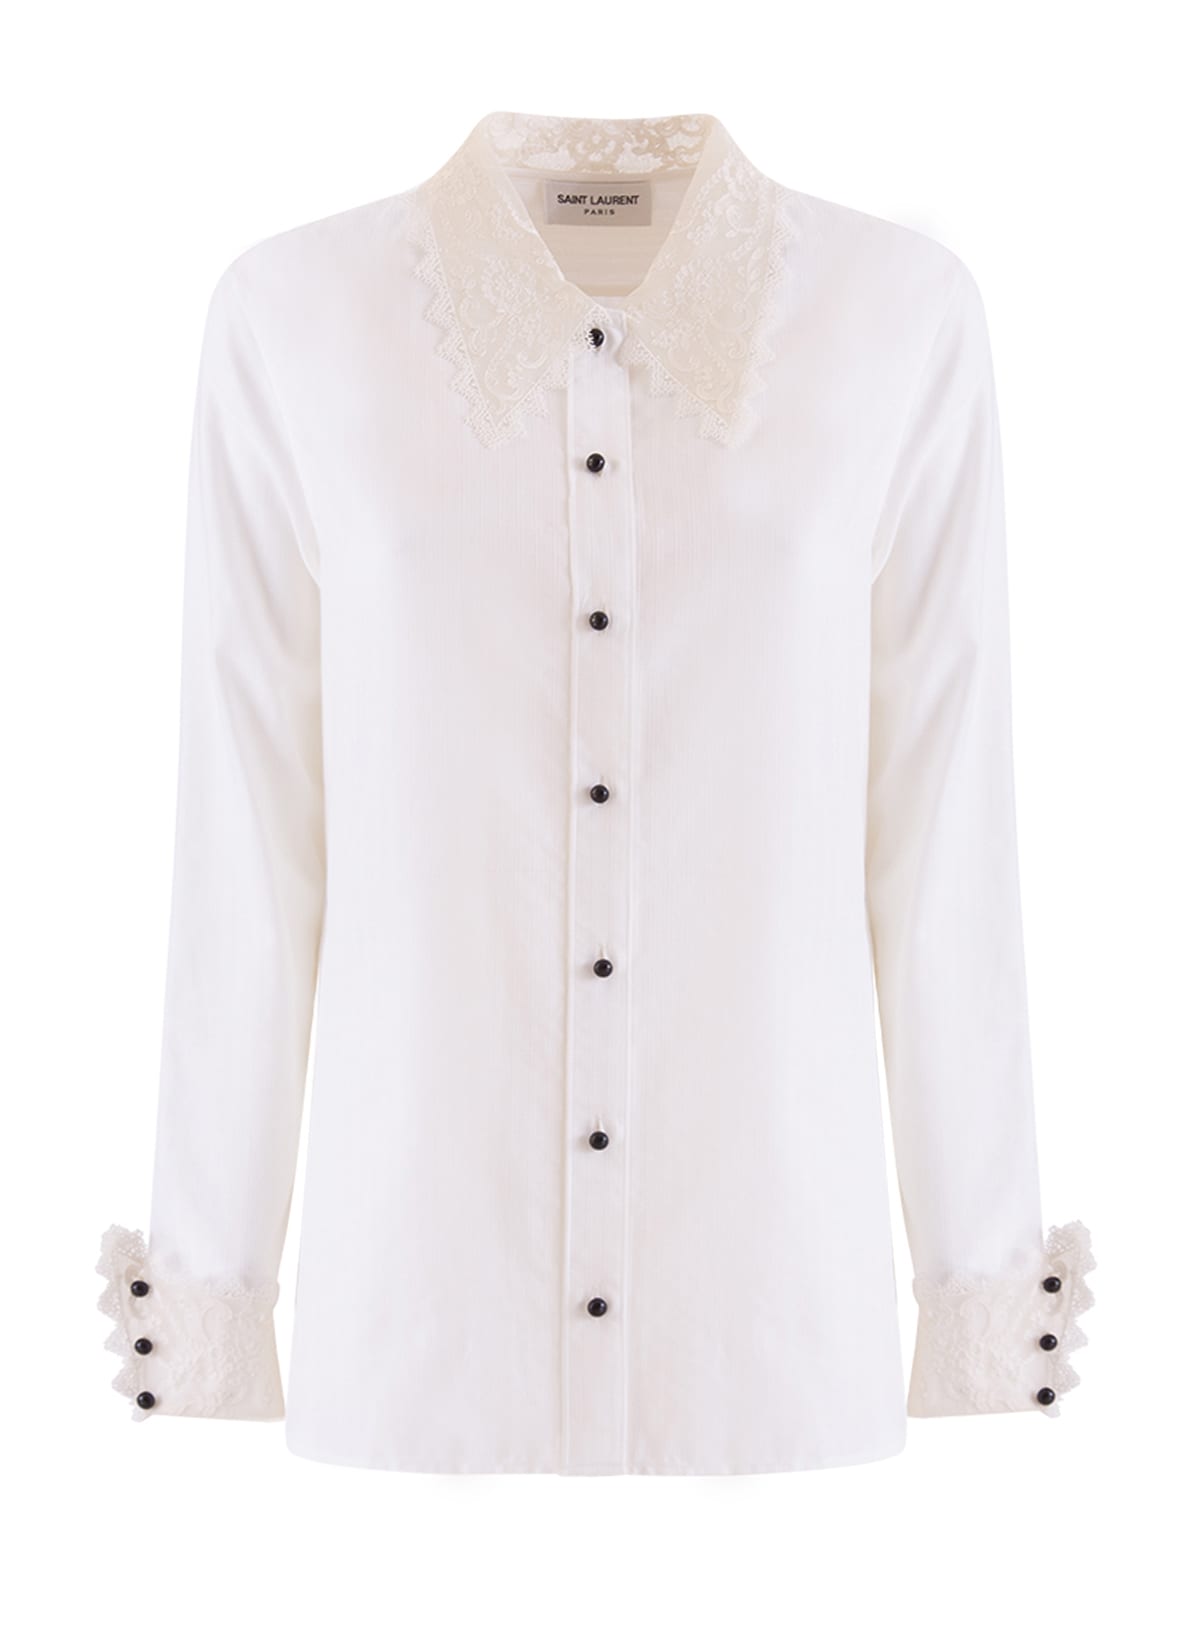 Saint Laurent Striped Shirt In Cotton Voile With Lace